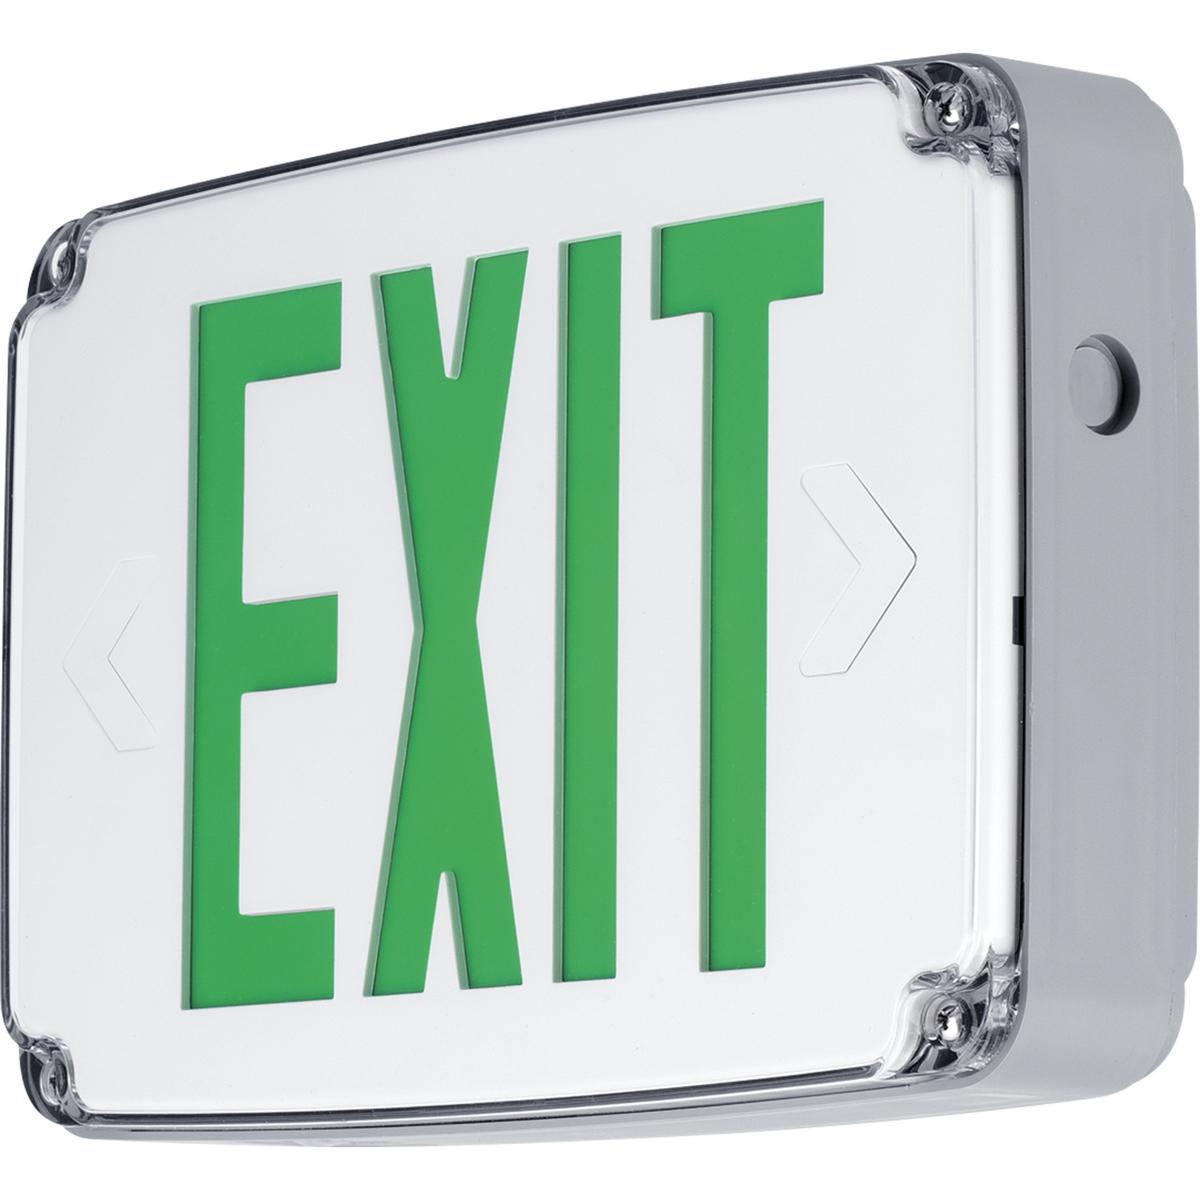 Hubbell PEWLE-DG-30 The PEWLE Series offers quality and value with a wet location rated emergency Exit sign. Housing and face-plate made from impact resistant UV stabilized polycarbonate. Housing is corrosion resistant and face-plate is fully gasketed. Exit face illumination